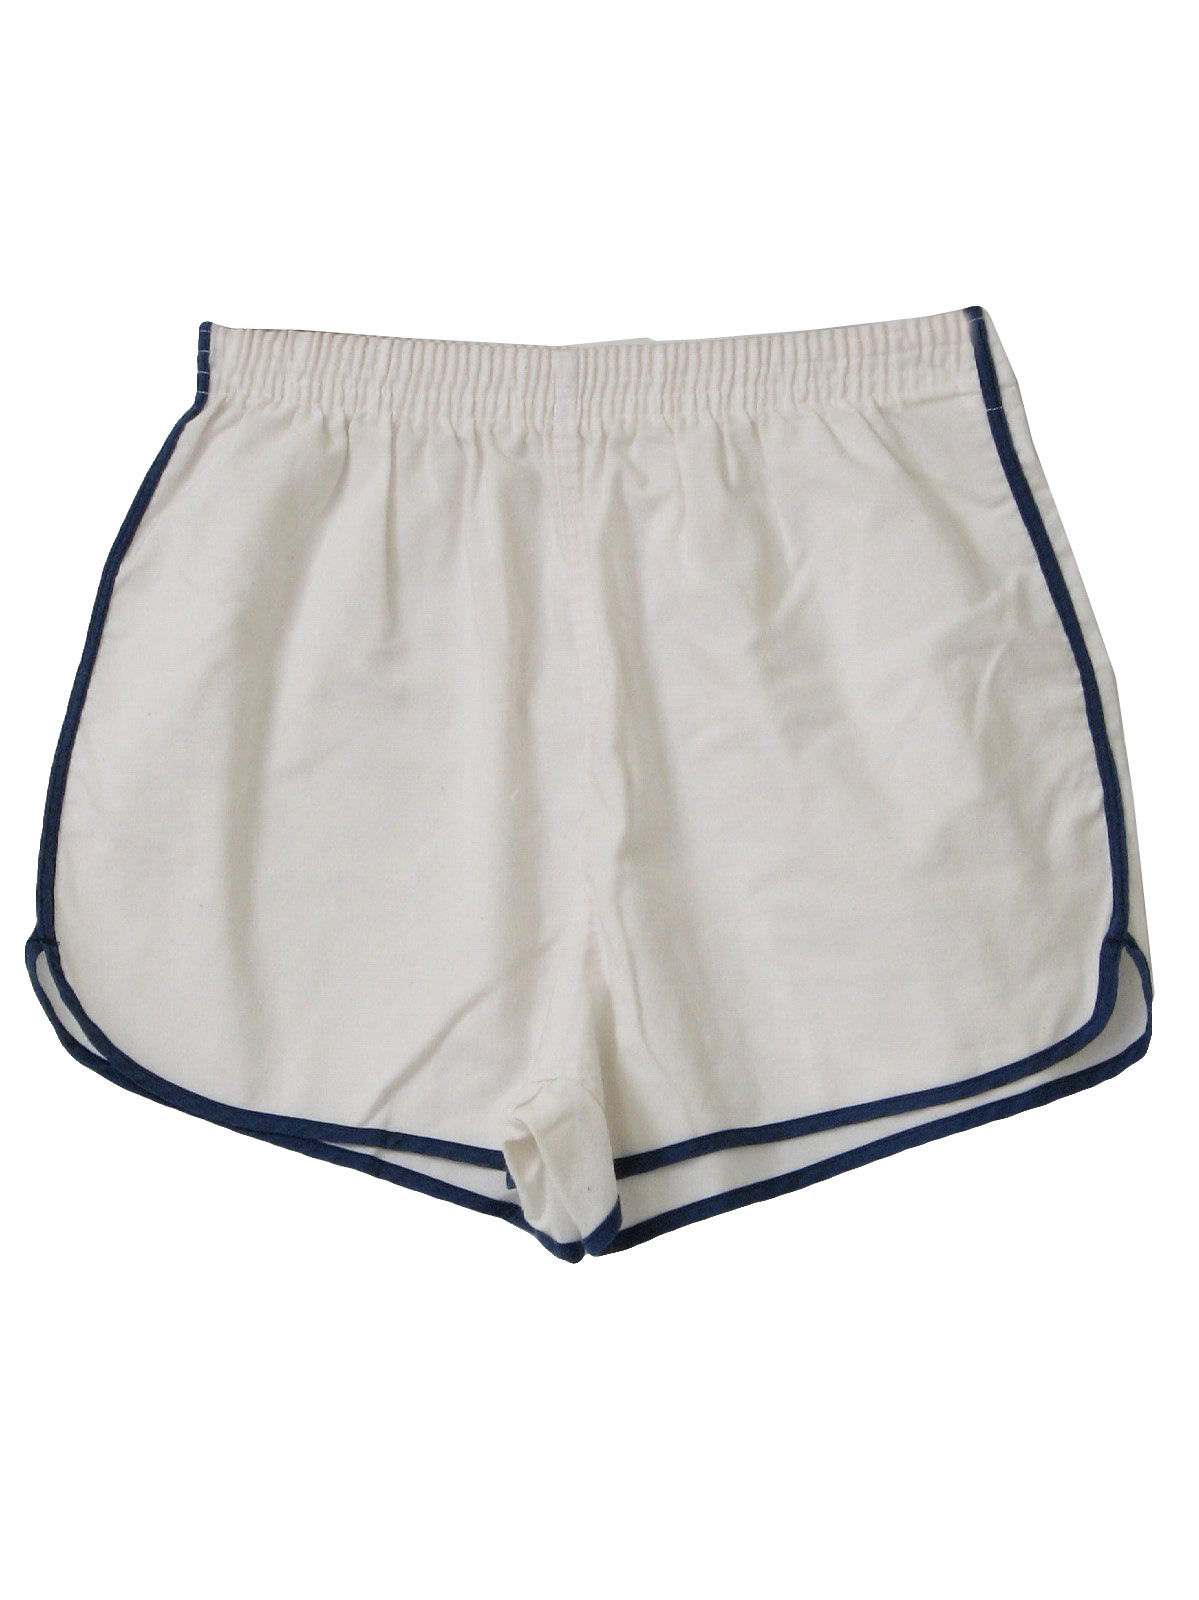 Vintage 80s Shorts: 80s -Sears- Mens white polyester and cotton ...